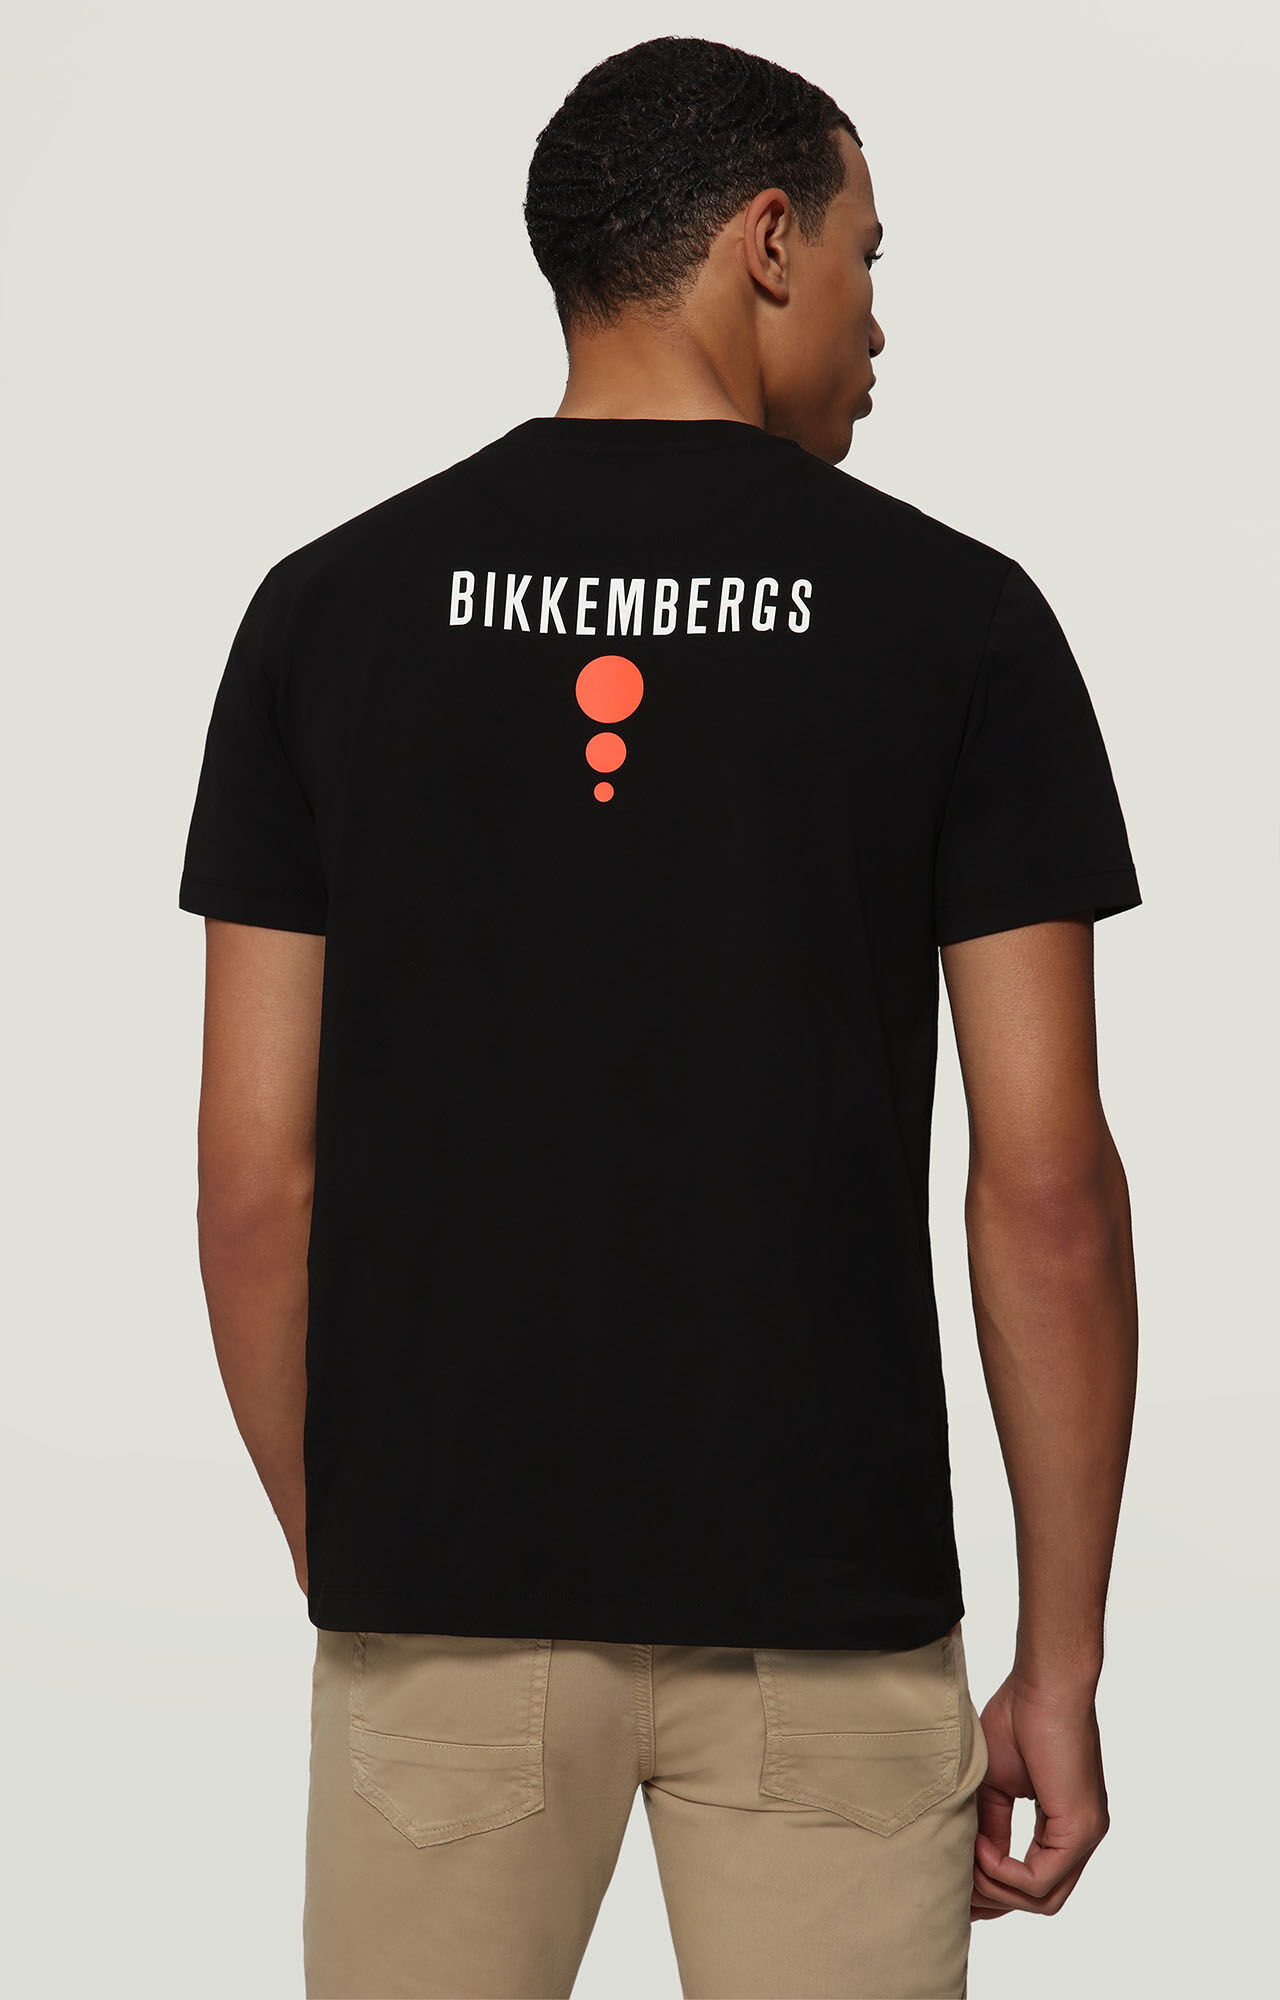 Bikkembergs T Shirt Top Sellers, UP TO 66% OFF | www 